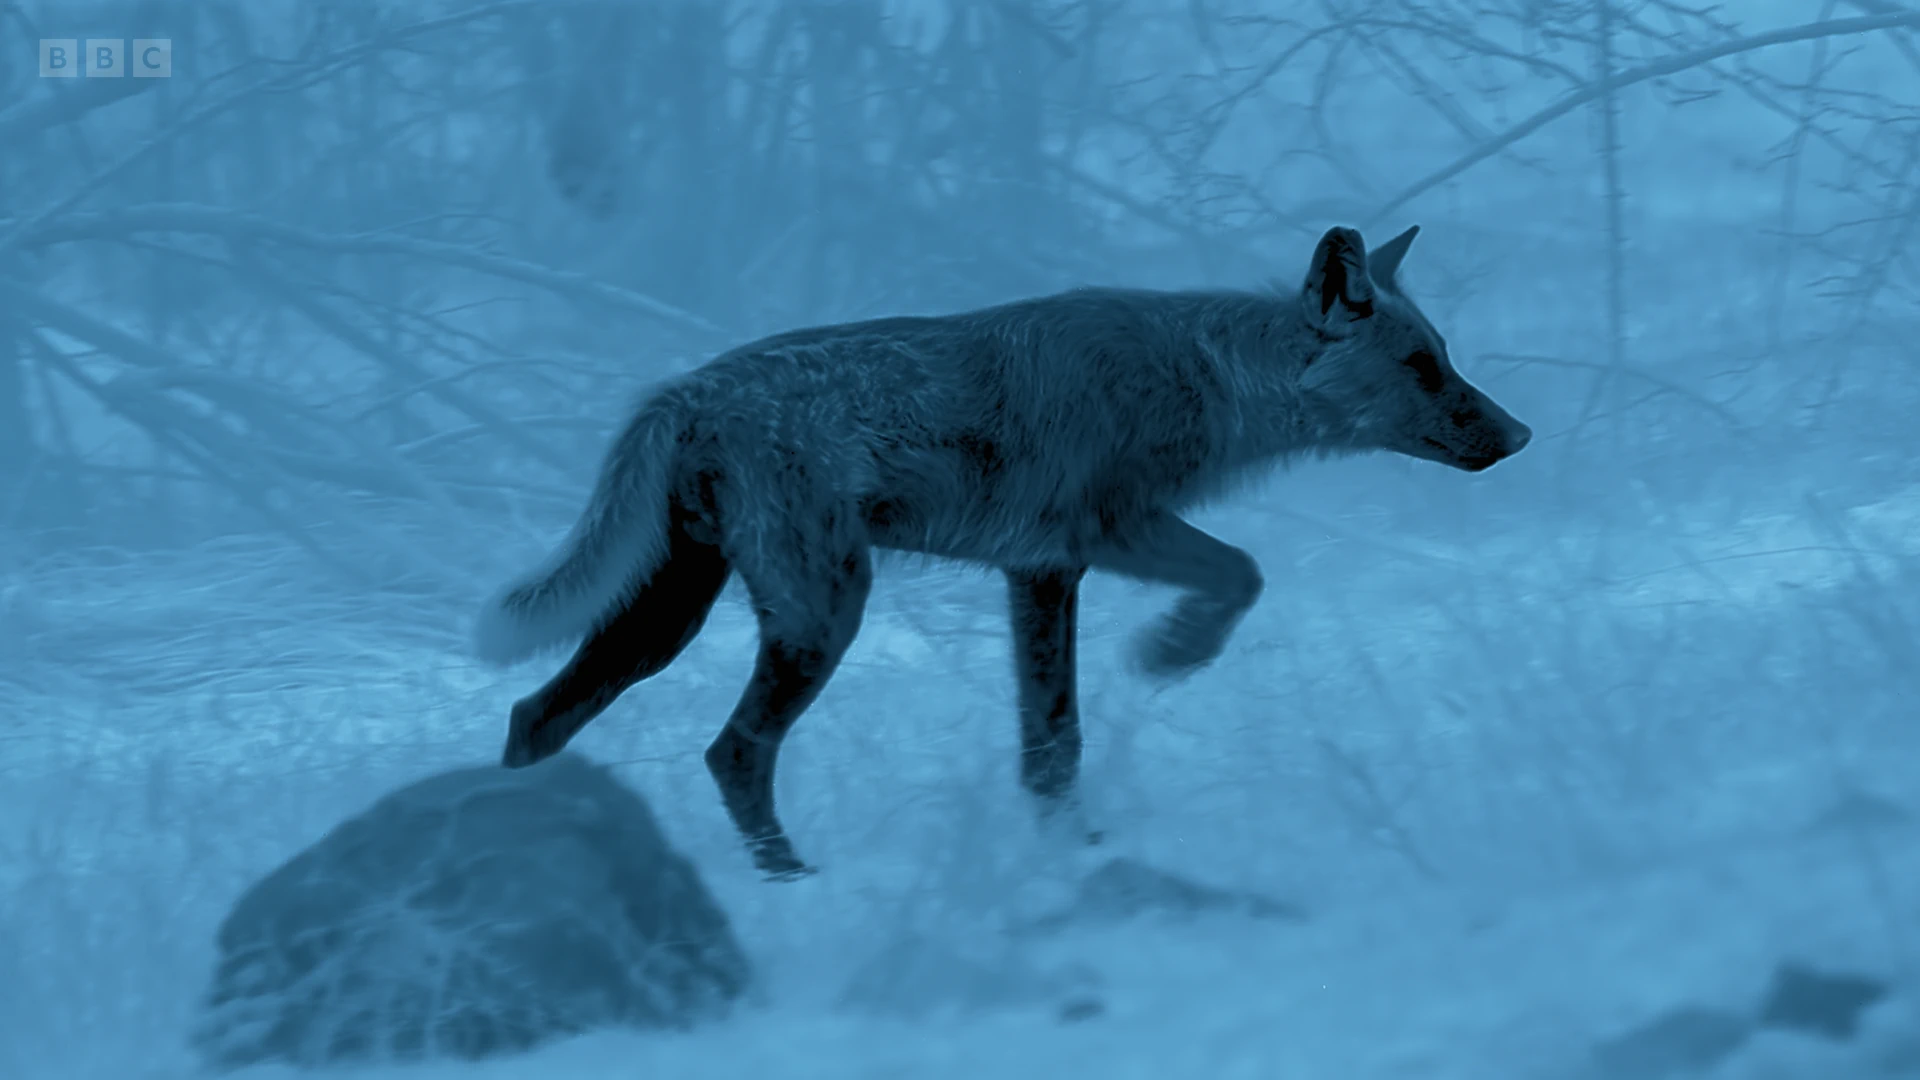 Italian wolf (Canis lupus italicus) as shown in Seven Worlds, One Planet - Europe